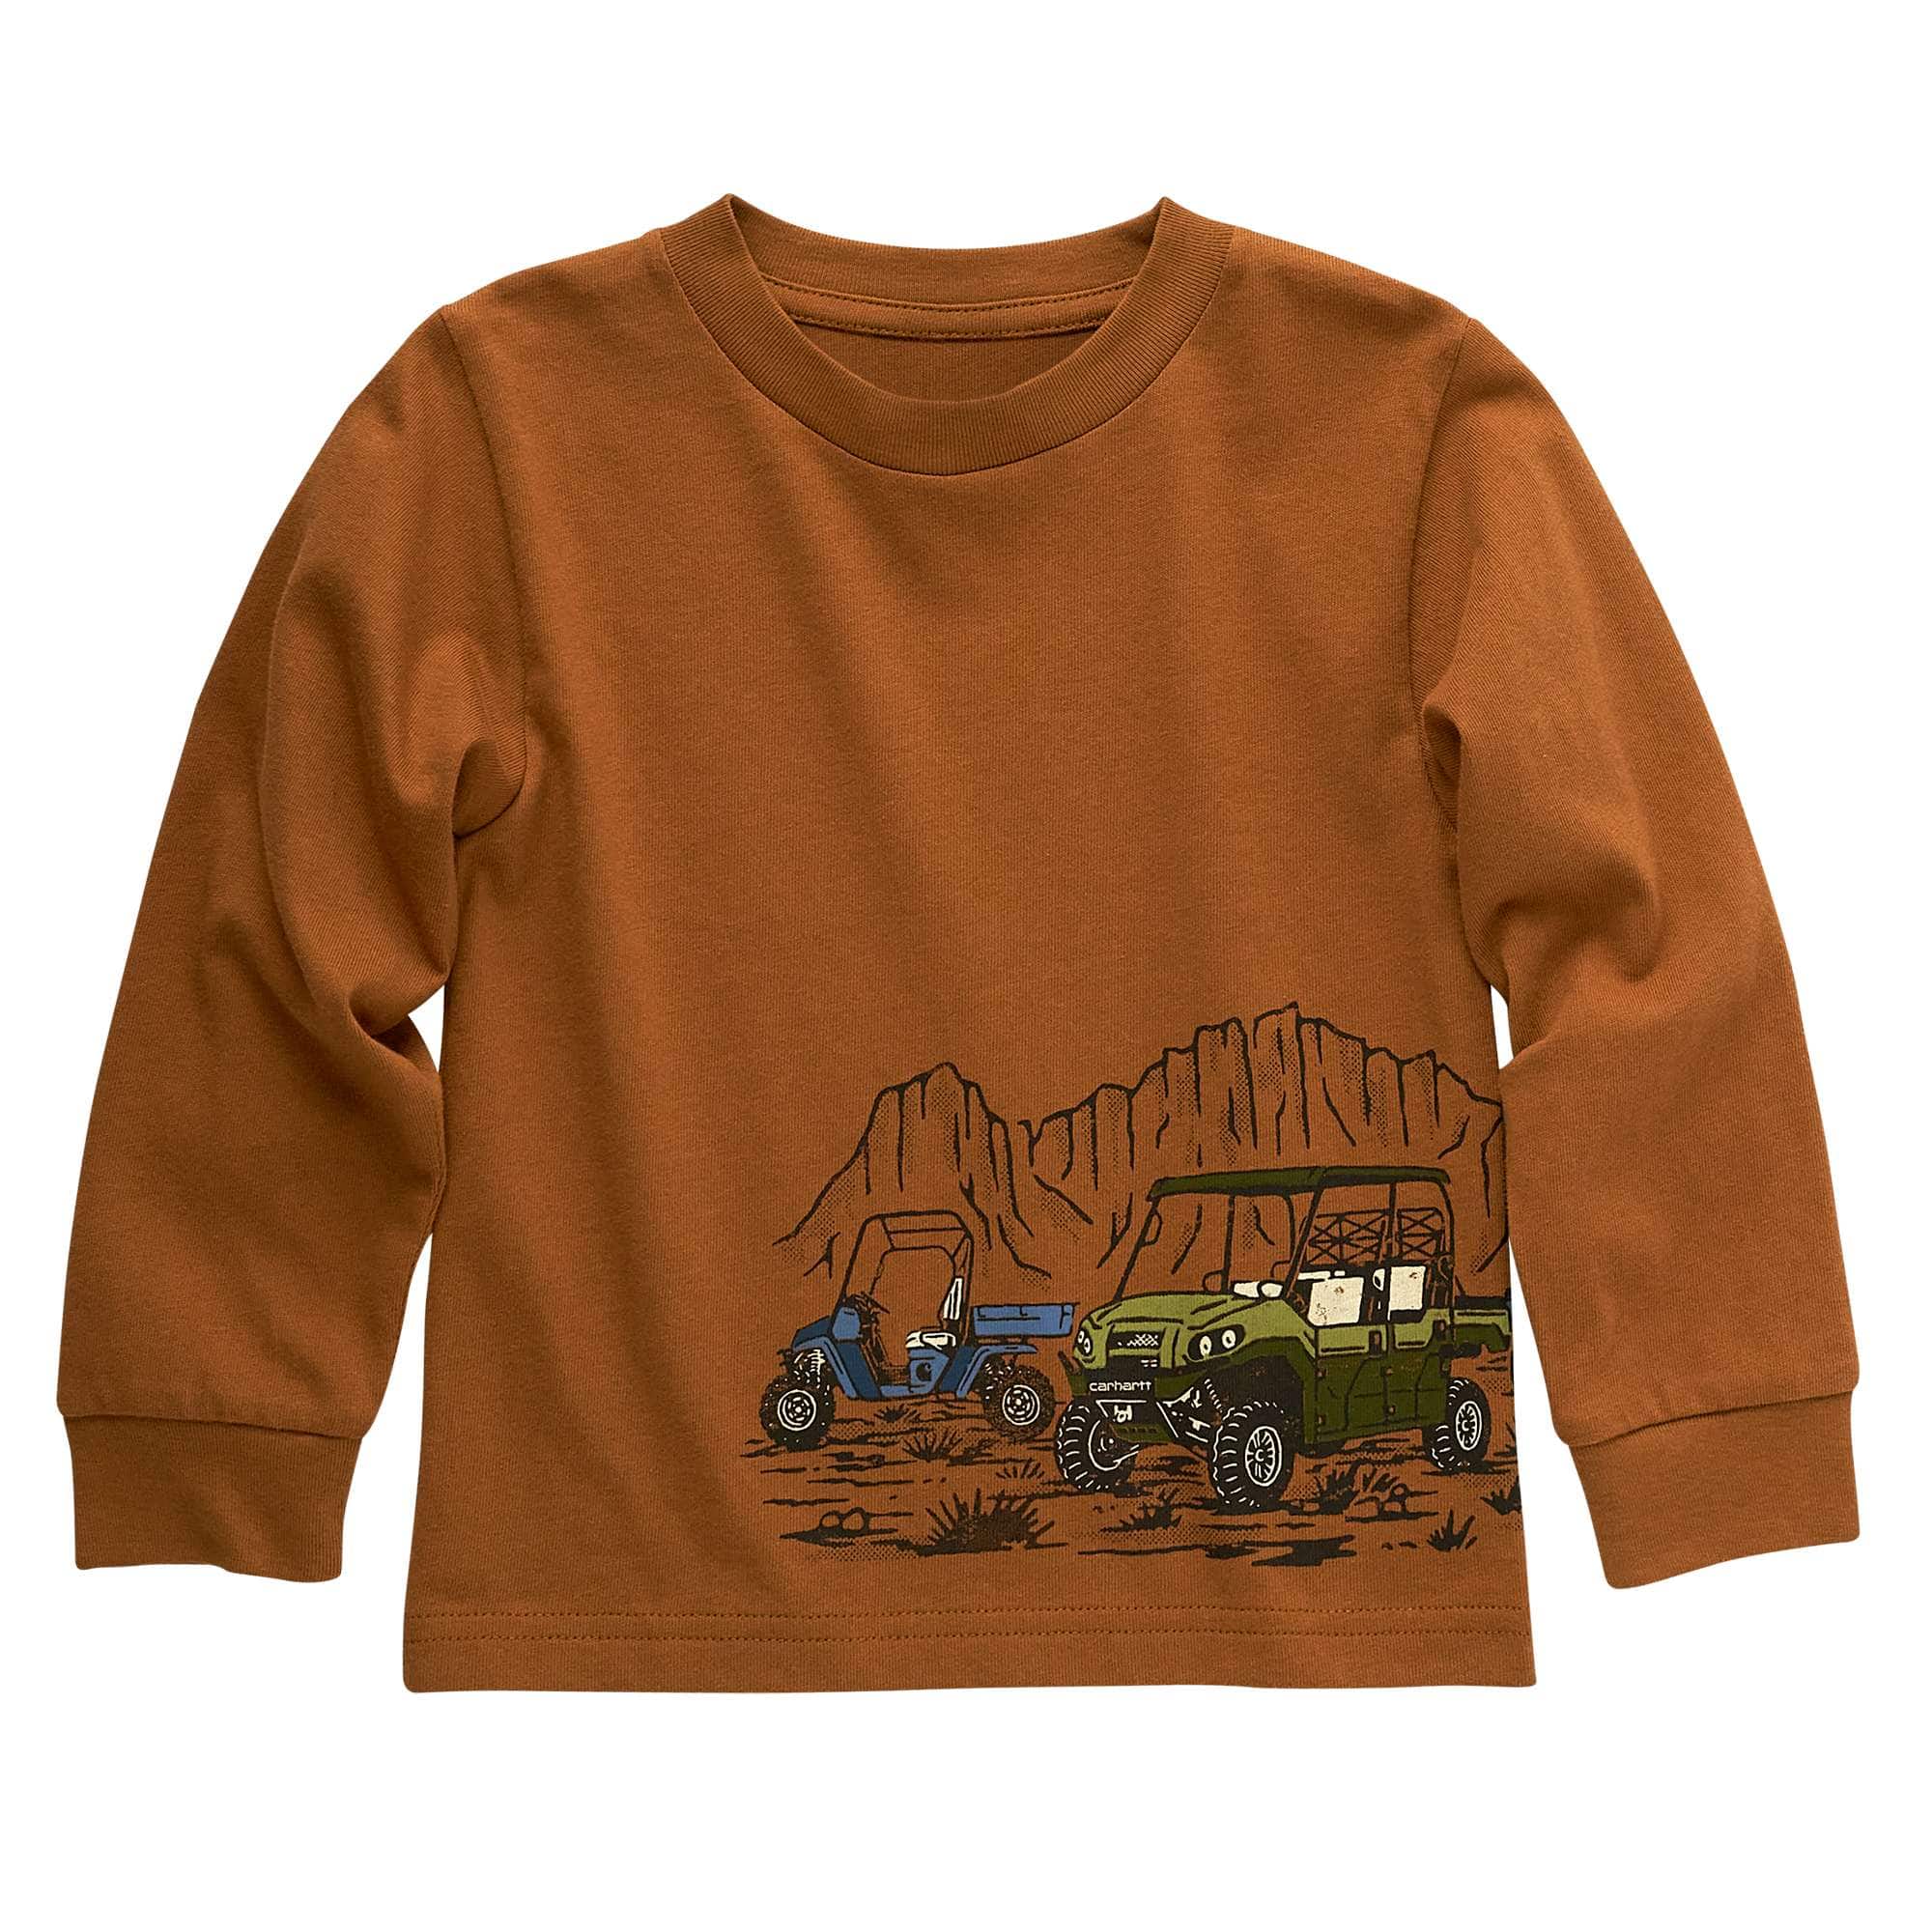 Kids' Clothing & Apparel - Outdoor & Casual Clothes, Coveralls & Work ...